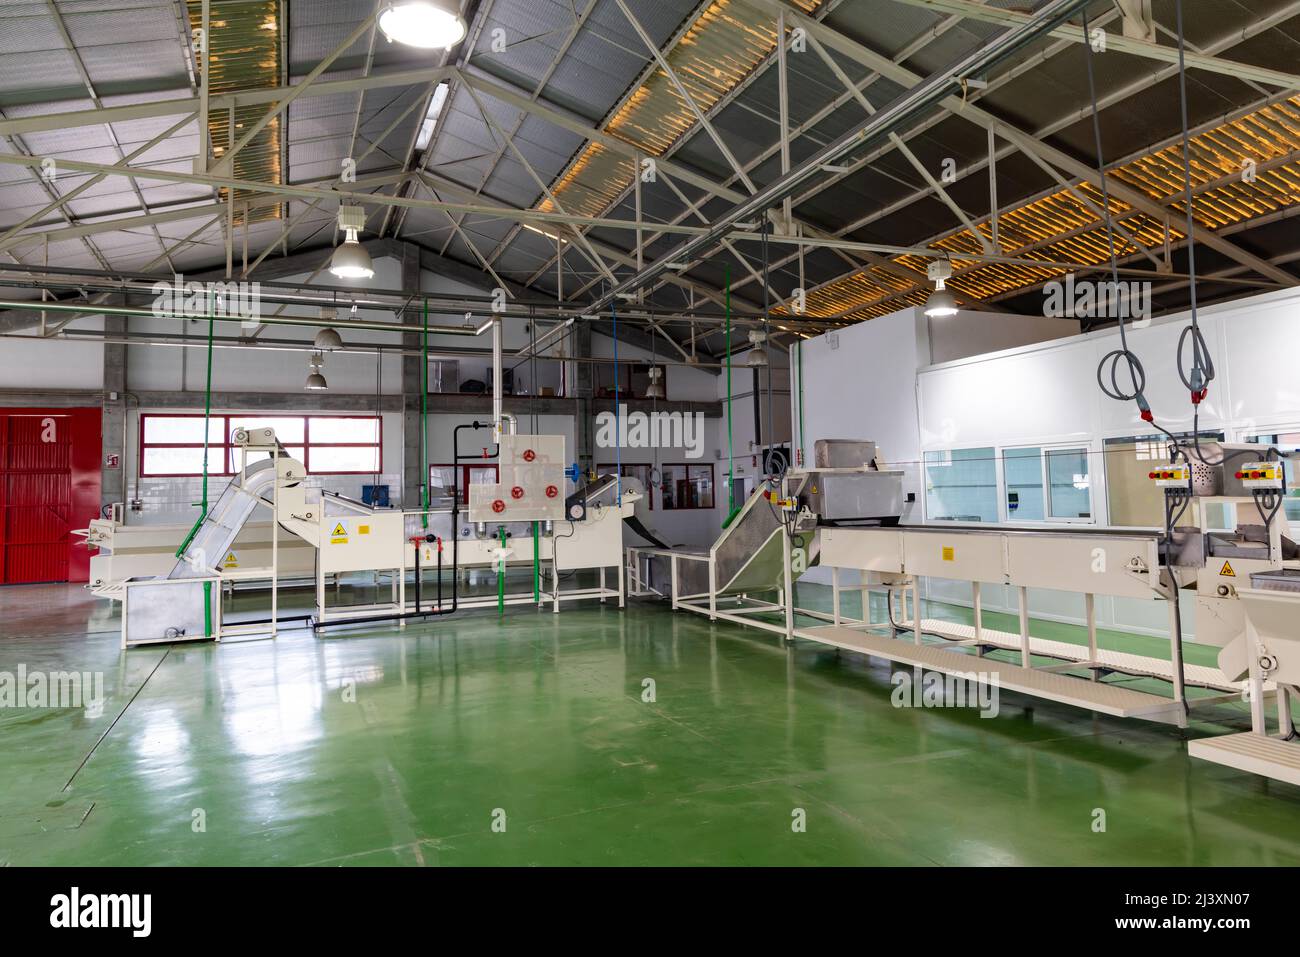 Molina de Segura, Spain- March 30, 2022: Setup of canning machinery in factory of canning industry Stock Photo